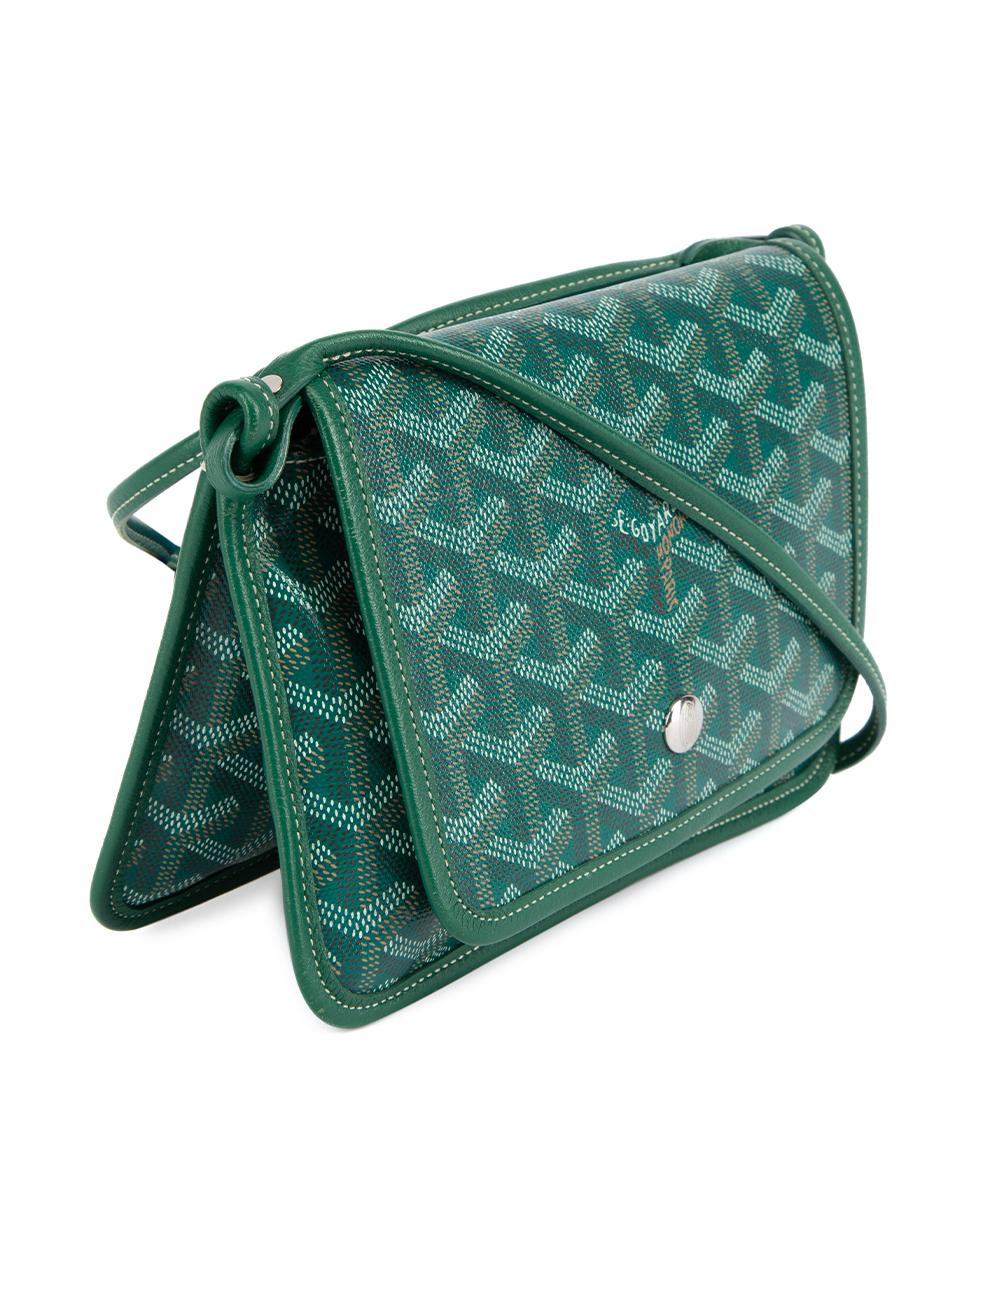 CONDITION is Very good. Minimal wear to bag is evident. Minimal wear to interior material where pencil mark and small stain can be seen on this used Goyard designer resale item. This item comes with original dustbag. Details Green Coated canvas